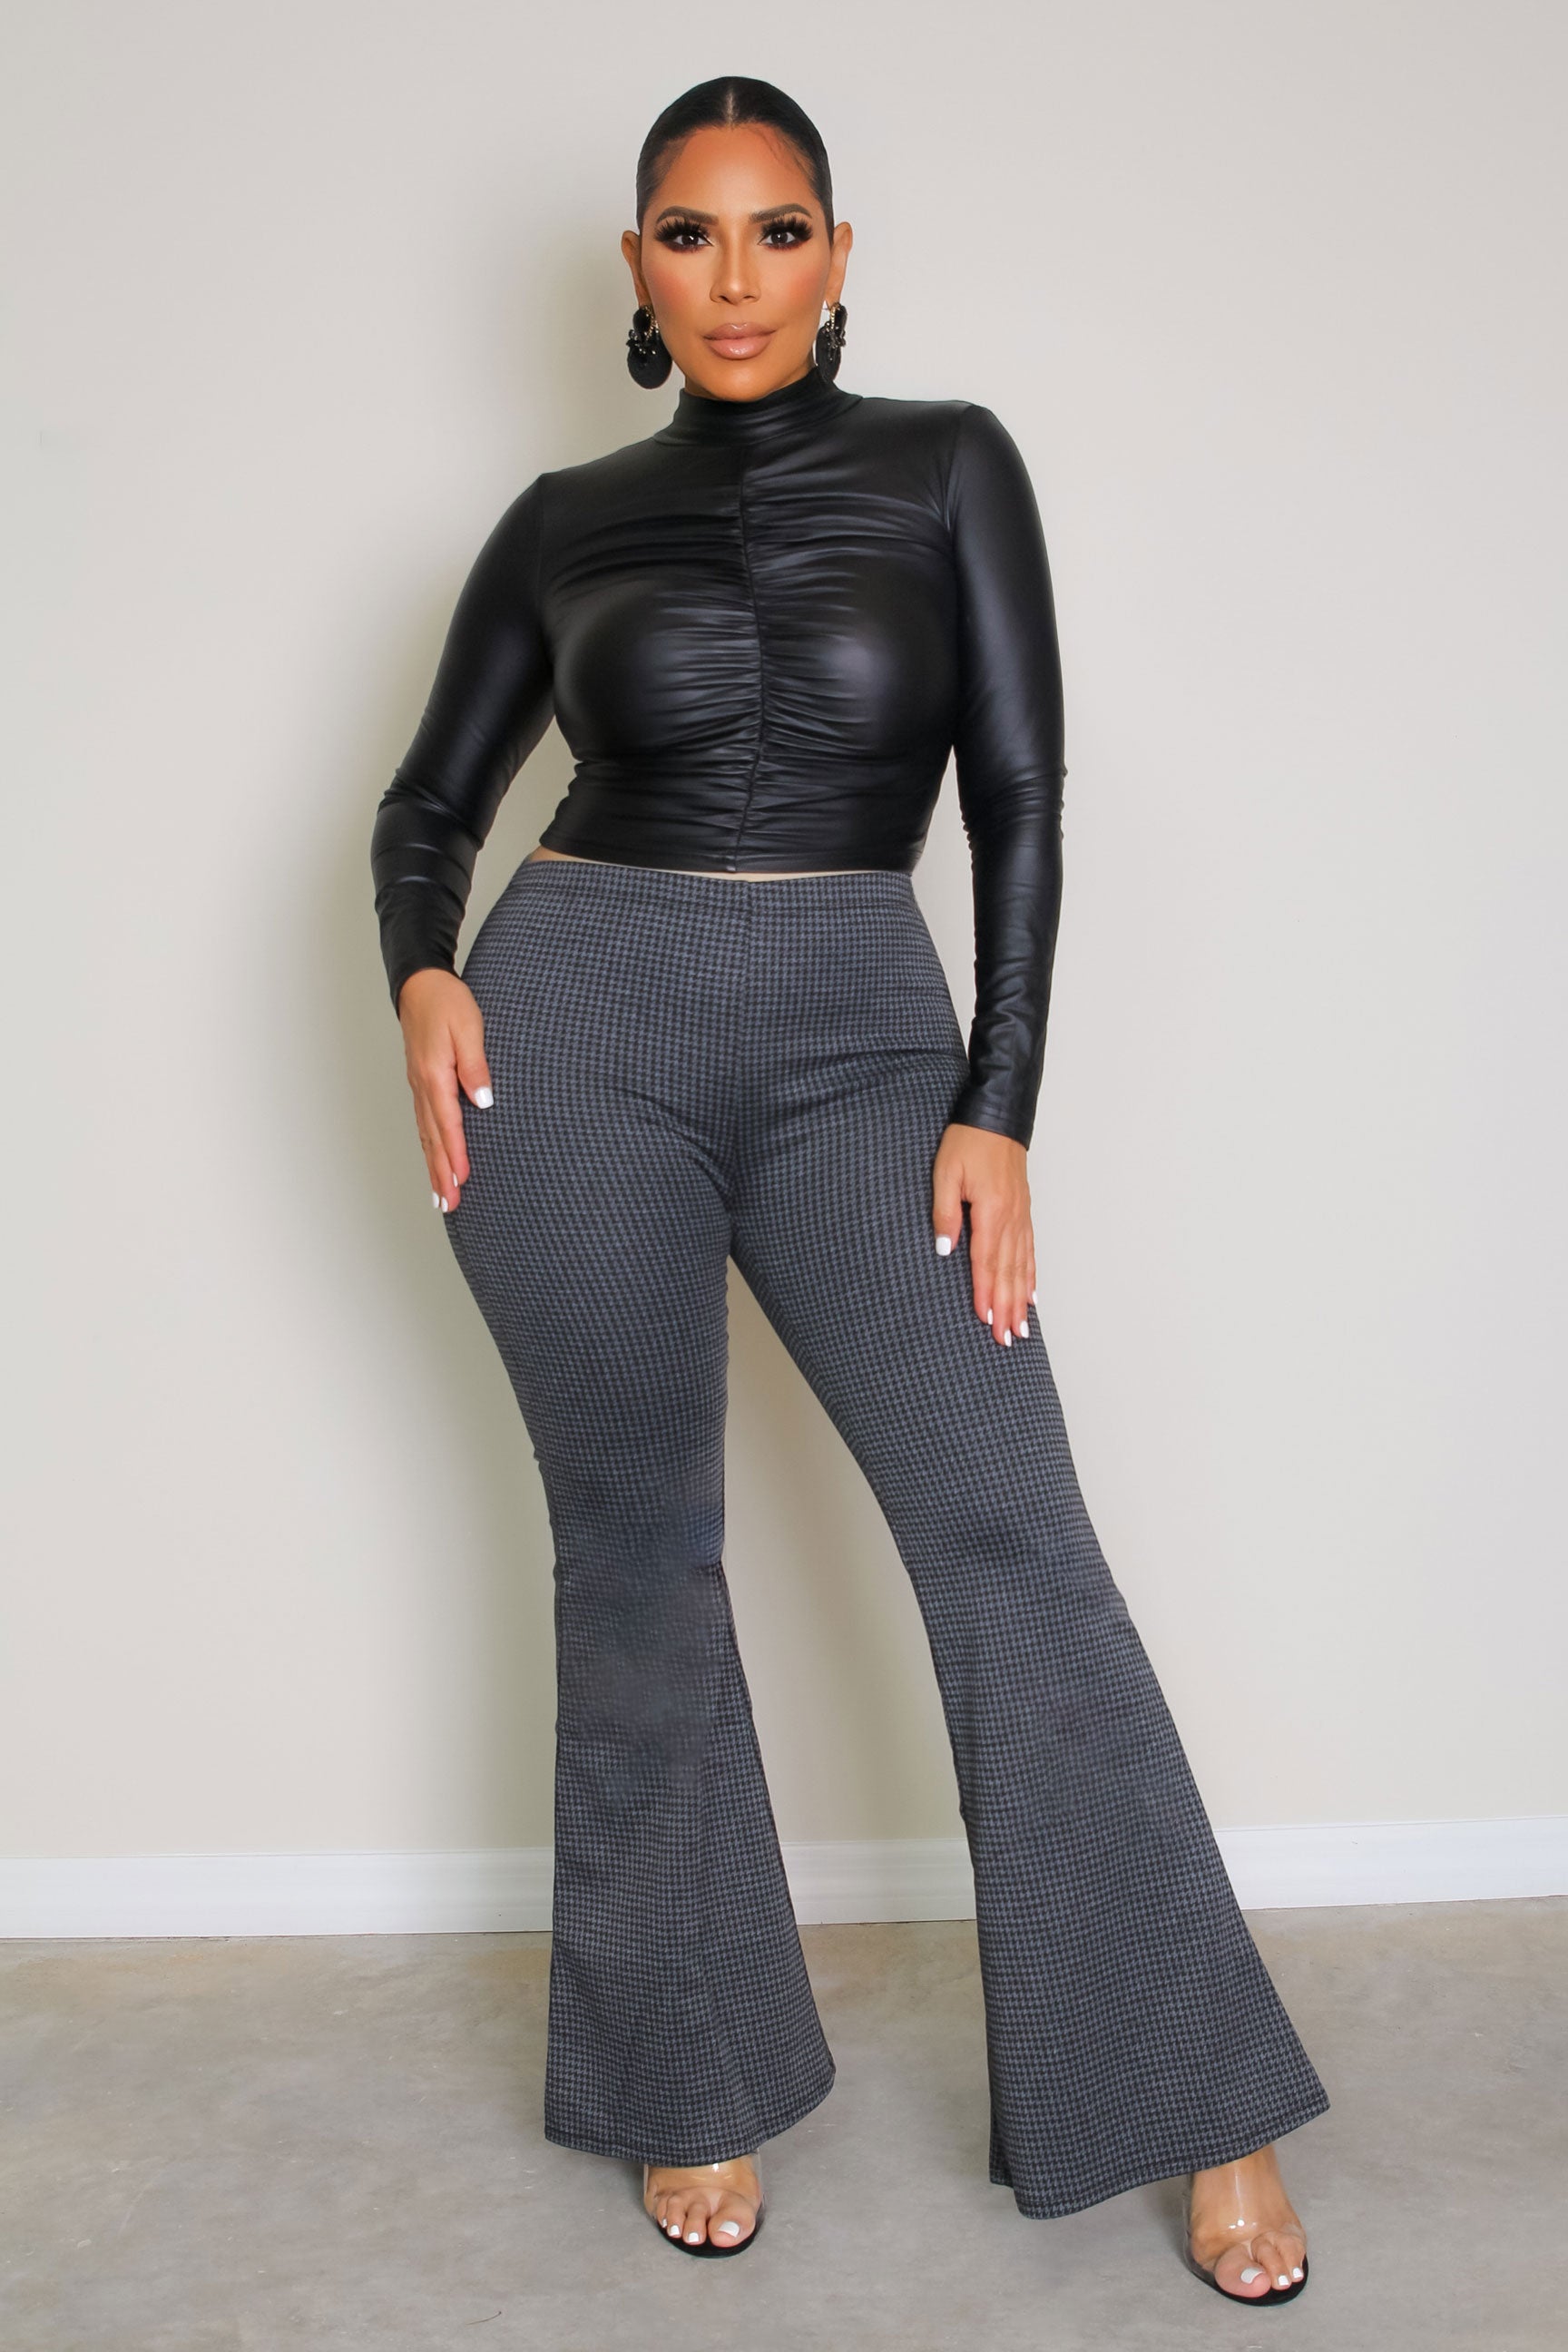 Mock Neck Ruched PU Leather Crop Top